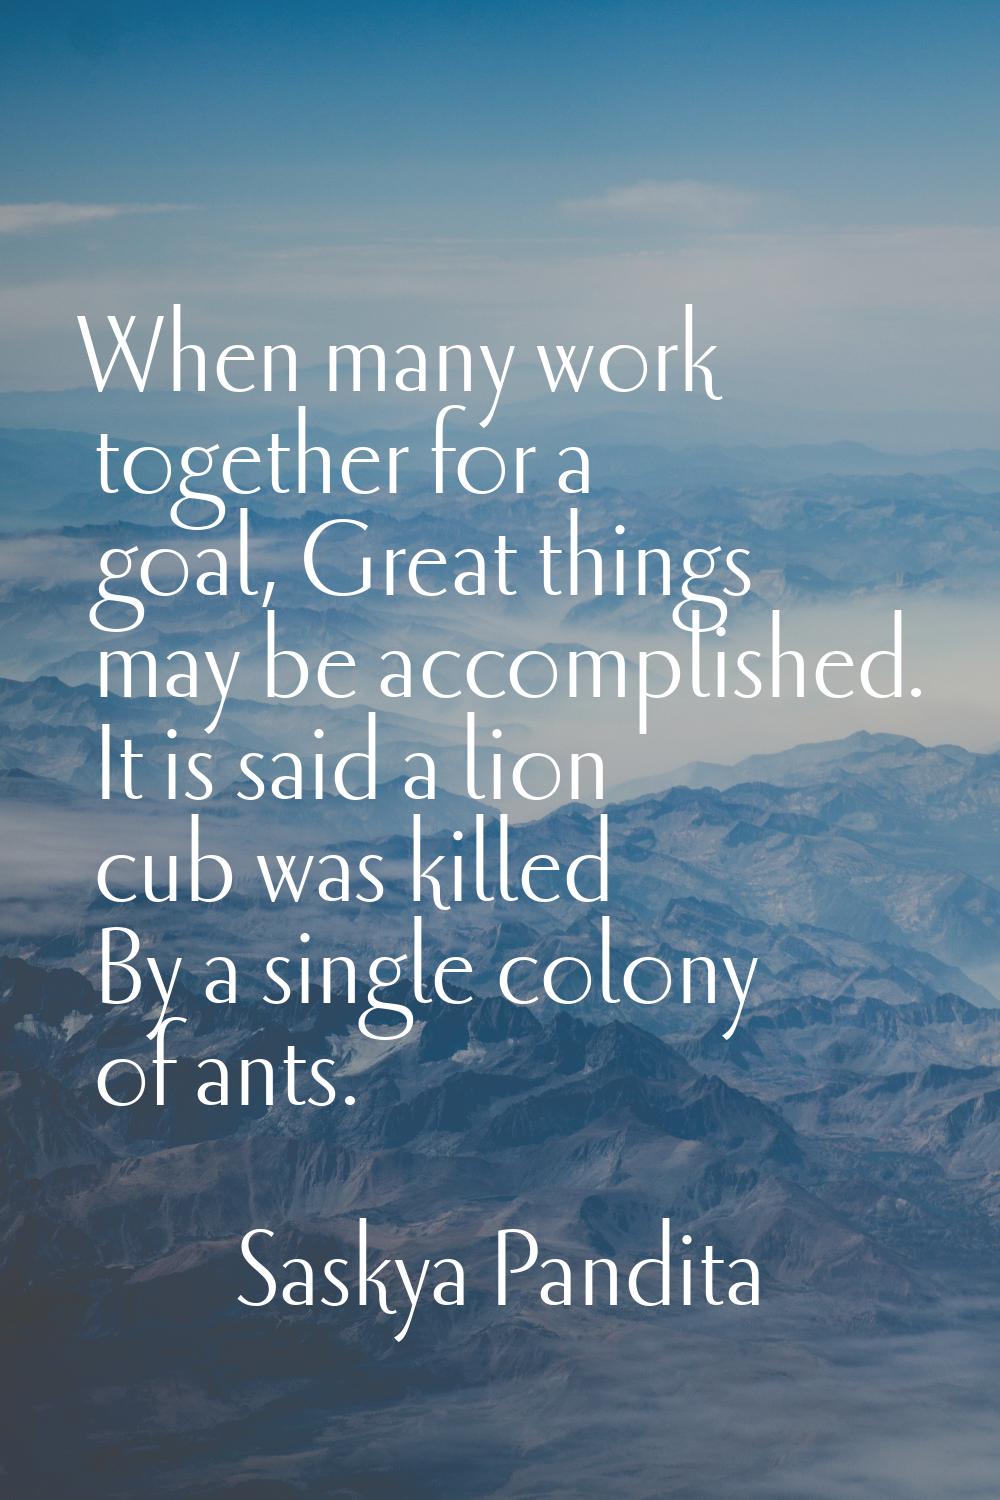 When many work together for a goal, Great things may be accomplished. It is said a lion cub was kil